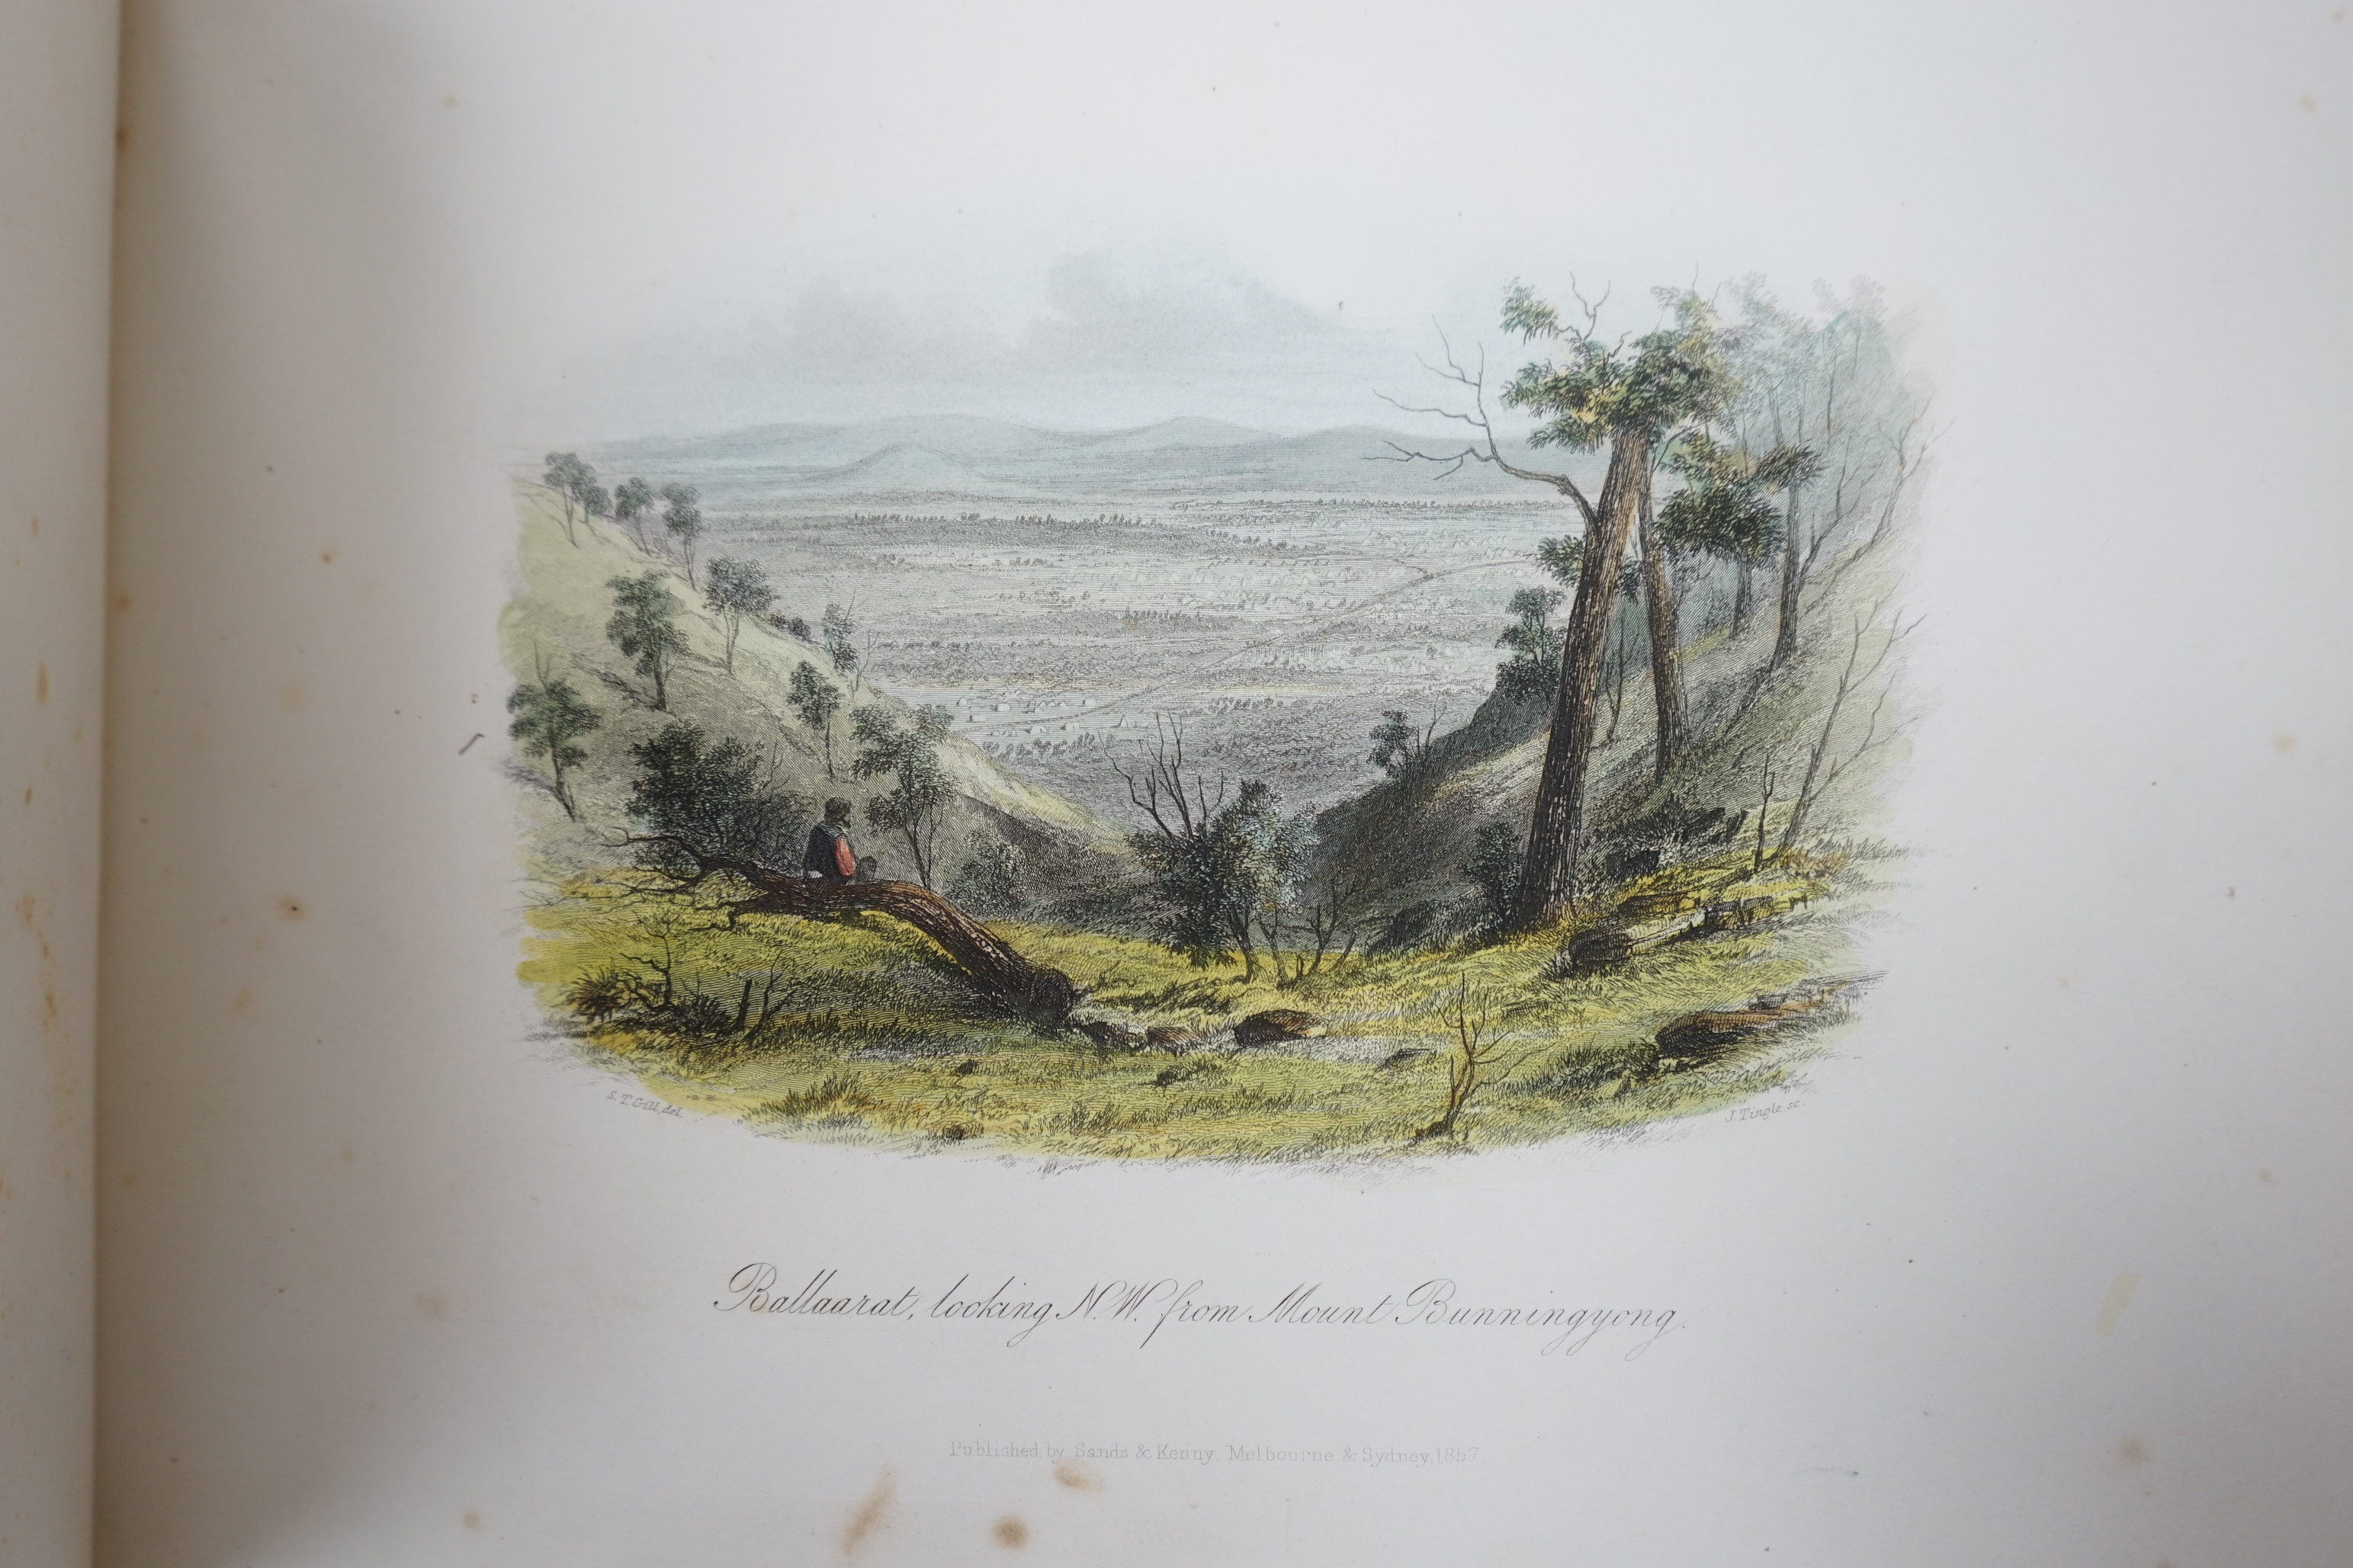 Sands & Kelly - Victoria Illustrated, oblong 4to, engraved pictorial title and 45 plates after S.T. Gill printed on stiff sheets, interleaved with tissue paper, contemporary red morocco gilt, gilt edges, Melbourne & Sydn